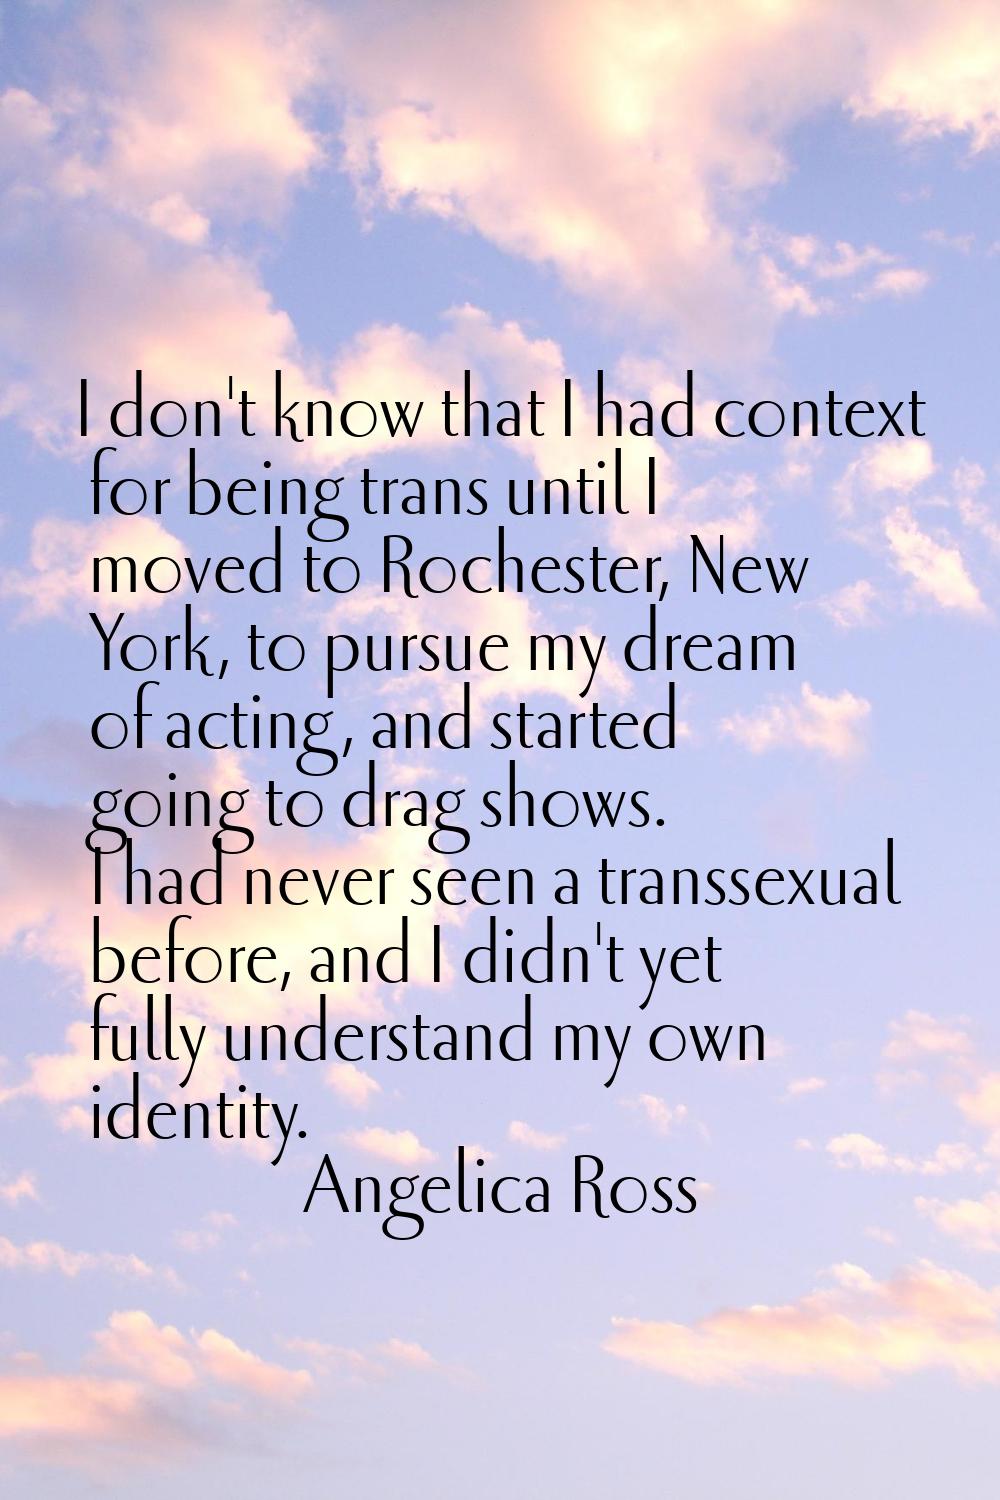 I don't know that I had context for being trans until I moved to Rochester, New York, to pursue my 